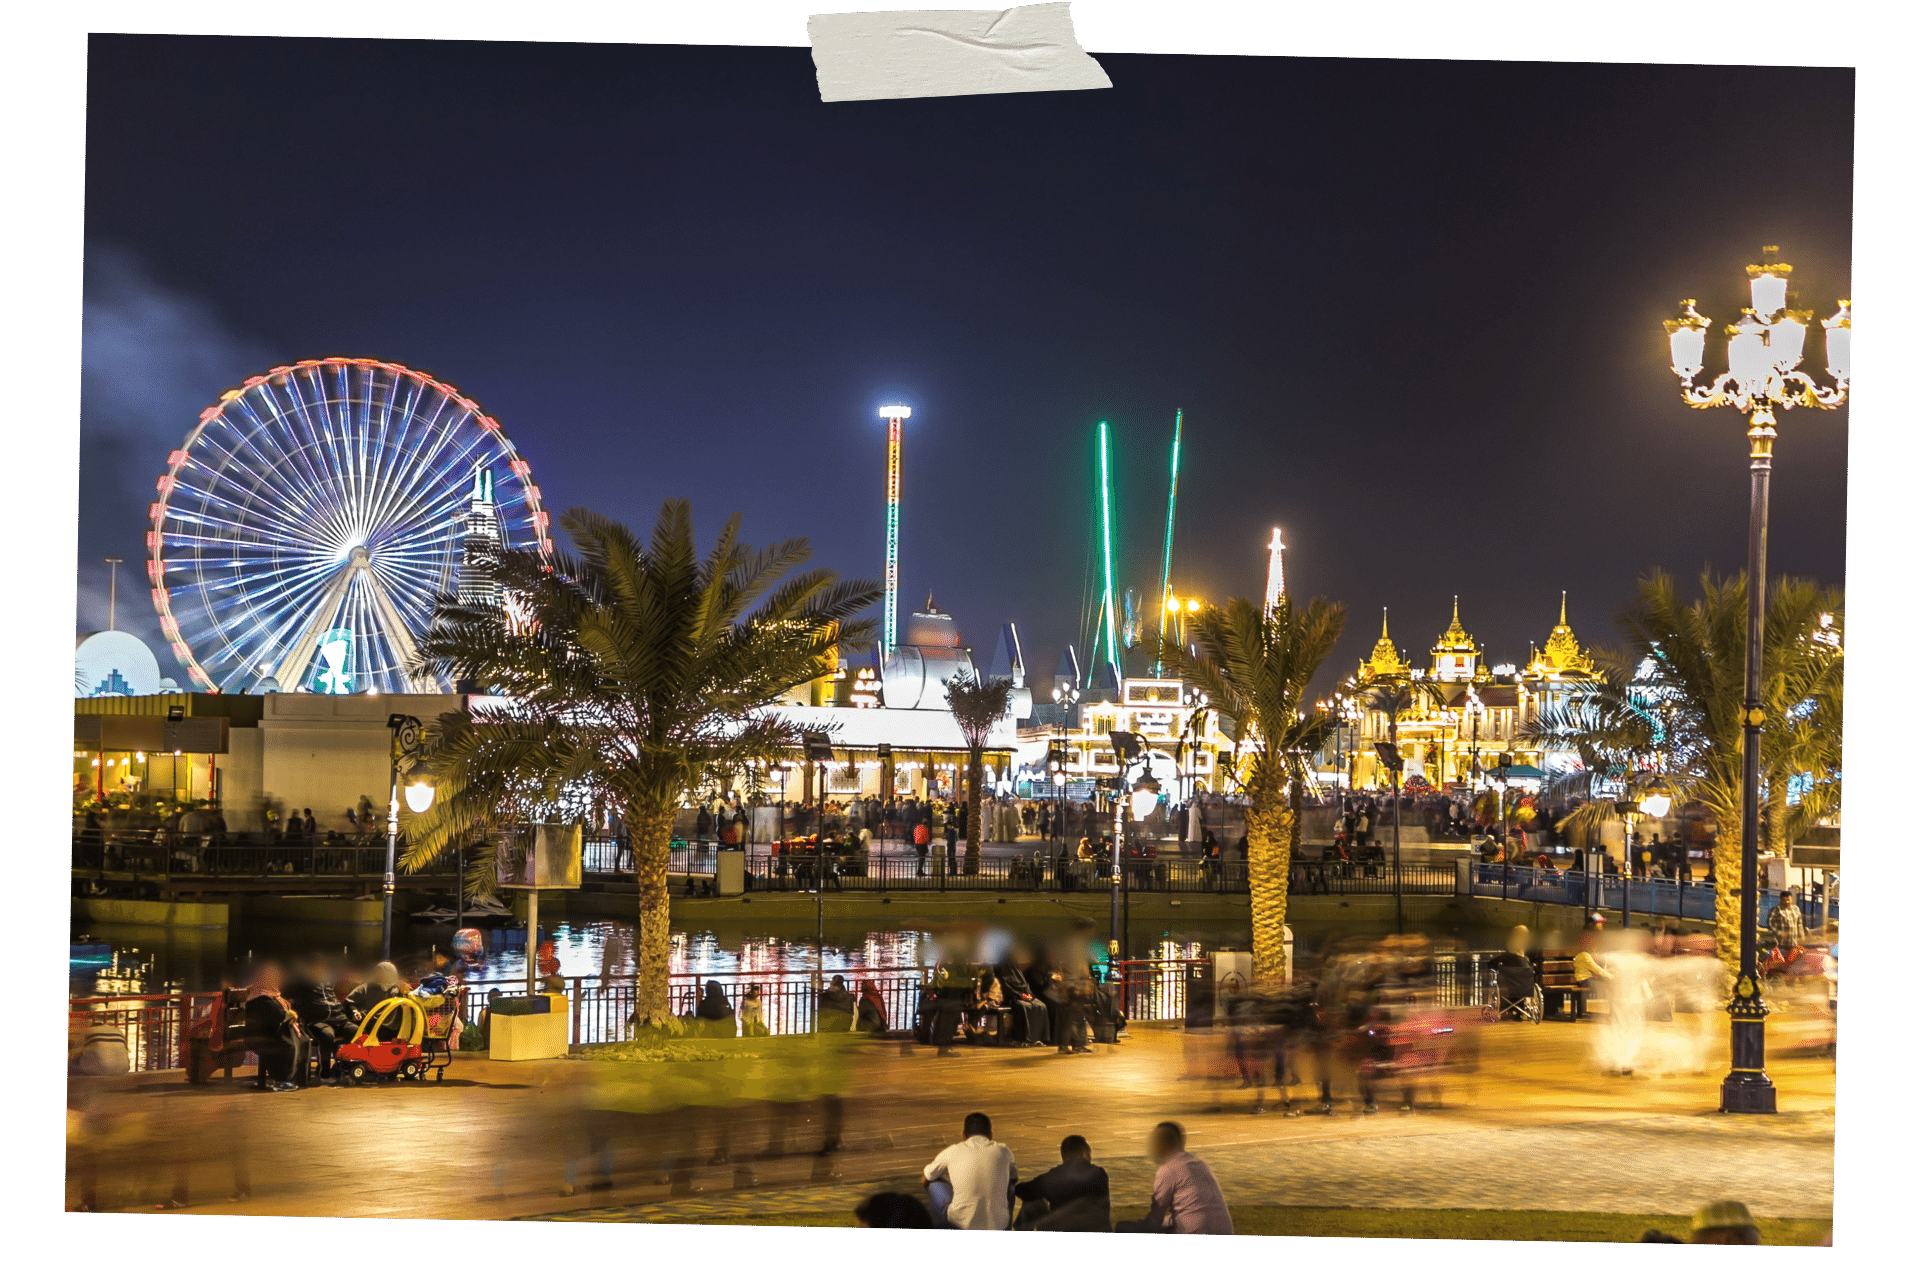 Global Village is one of Dubai's hidden gems. An image, scrapbook style, shows a busy night scene in Dubai, with lights, palm trees, and a Ferris wheel.